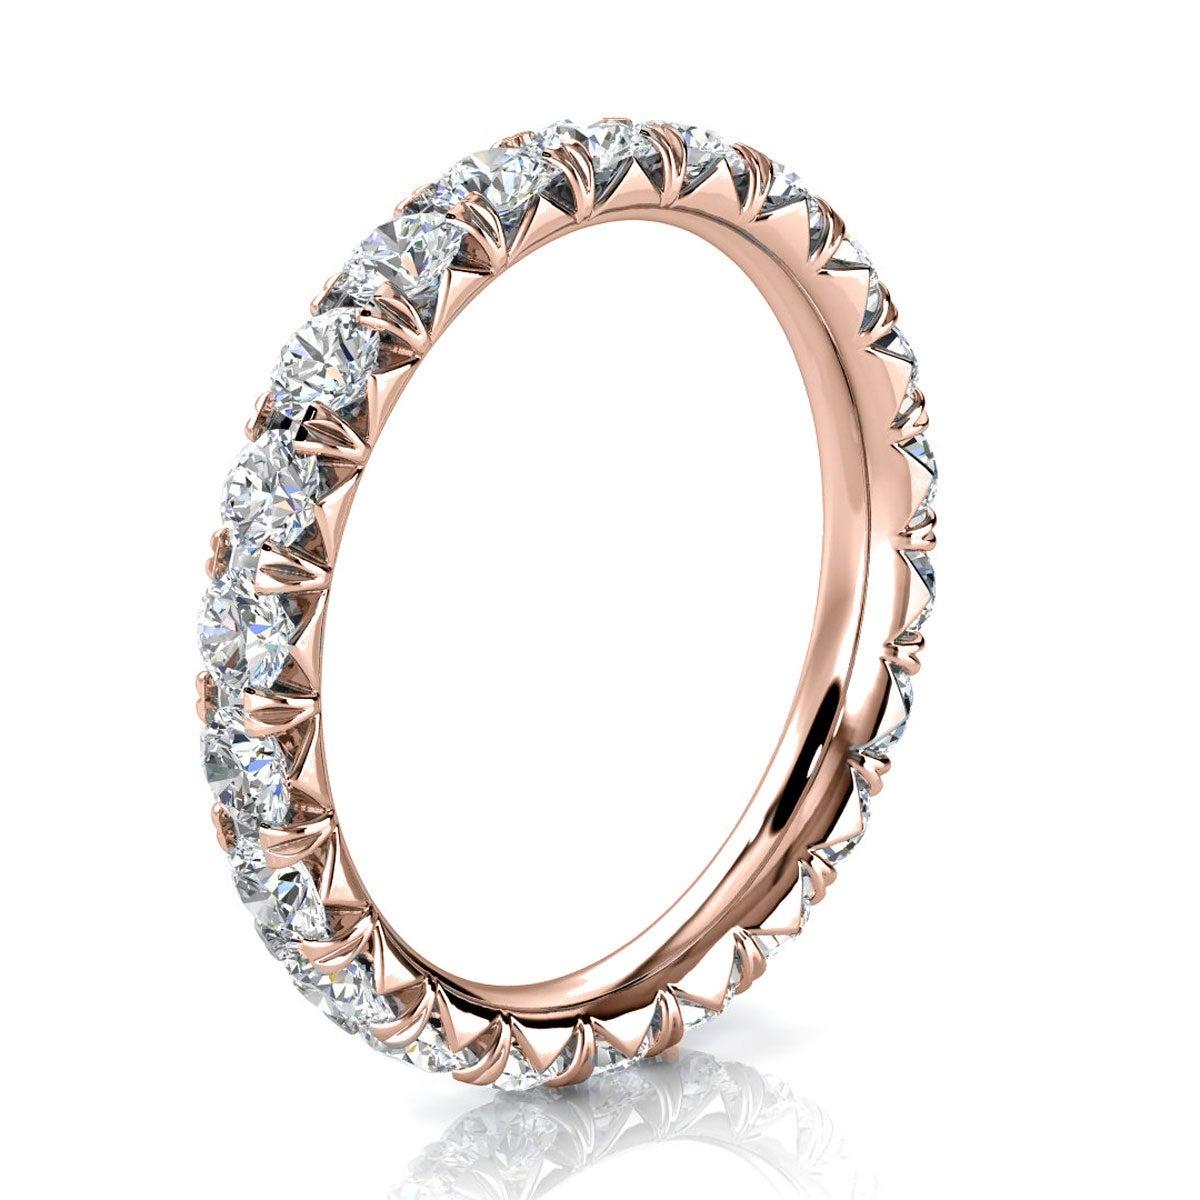 For Sale:  14k Rose Gold Mia French Pave Diamond Eternity Ring '1 1/2 Ct. Tw' 2